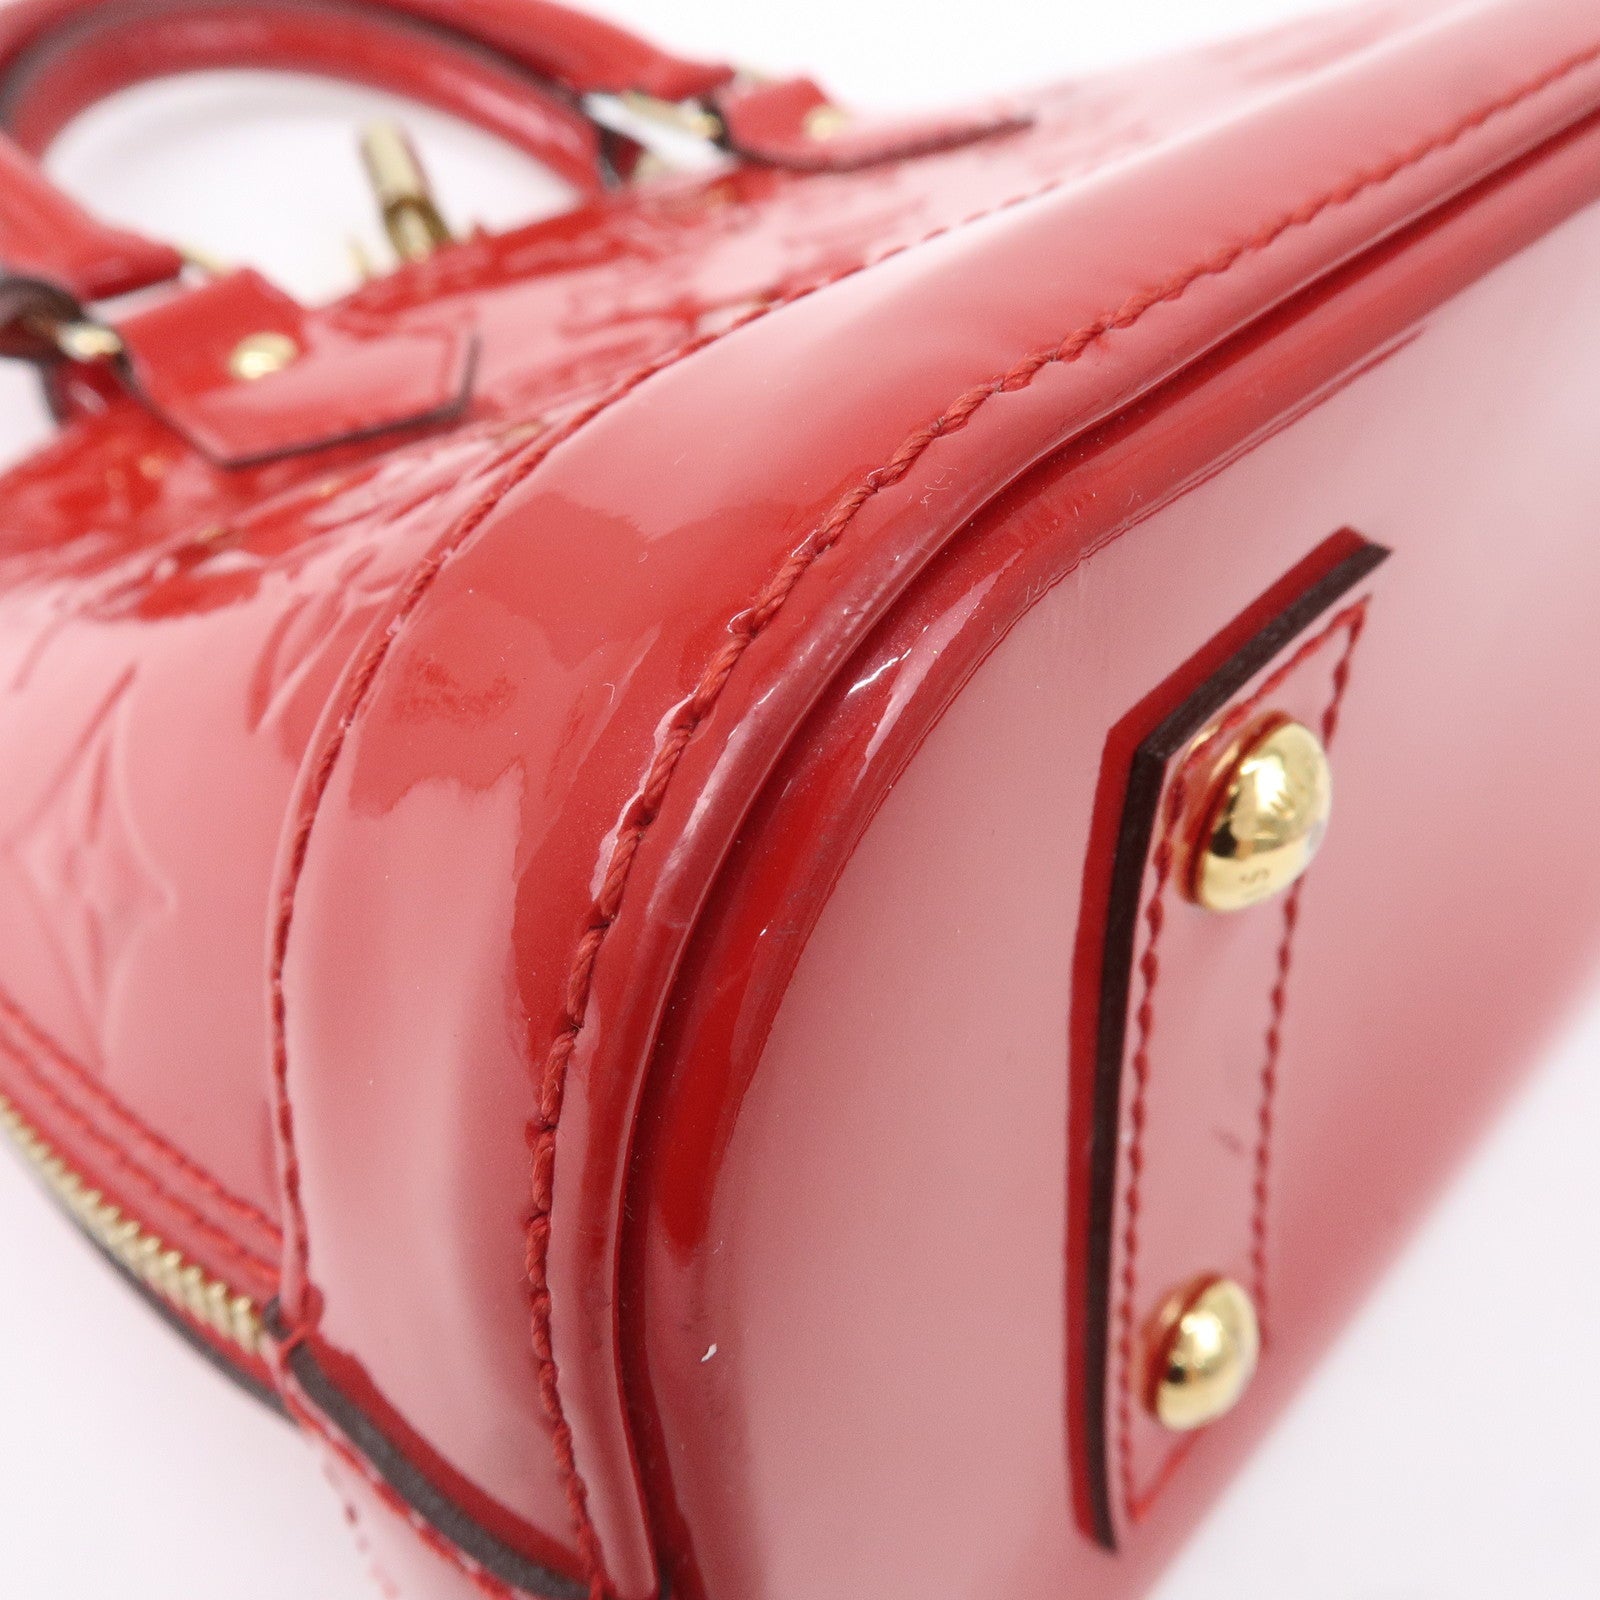 Louis Vuitton Red Monogram Vernis Alma PM Leather Patent leather